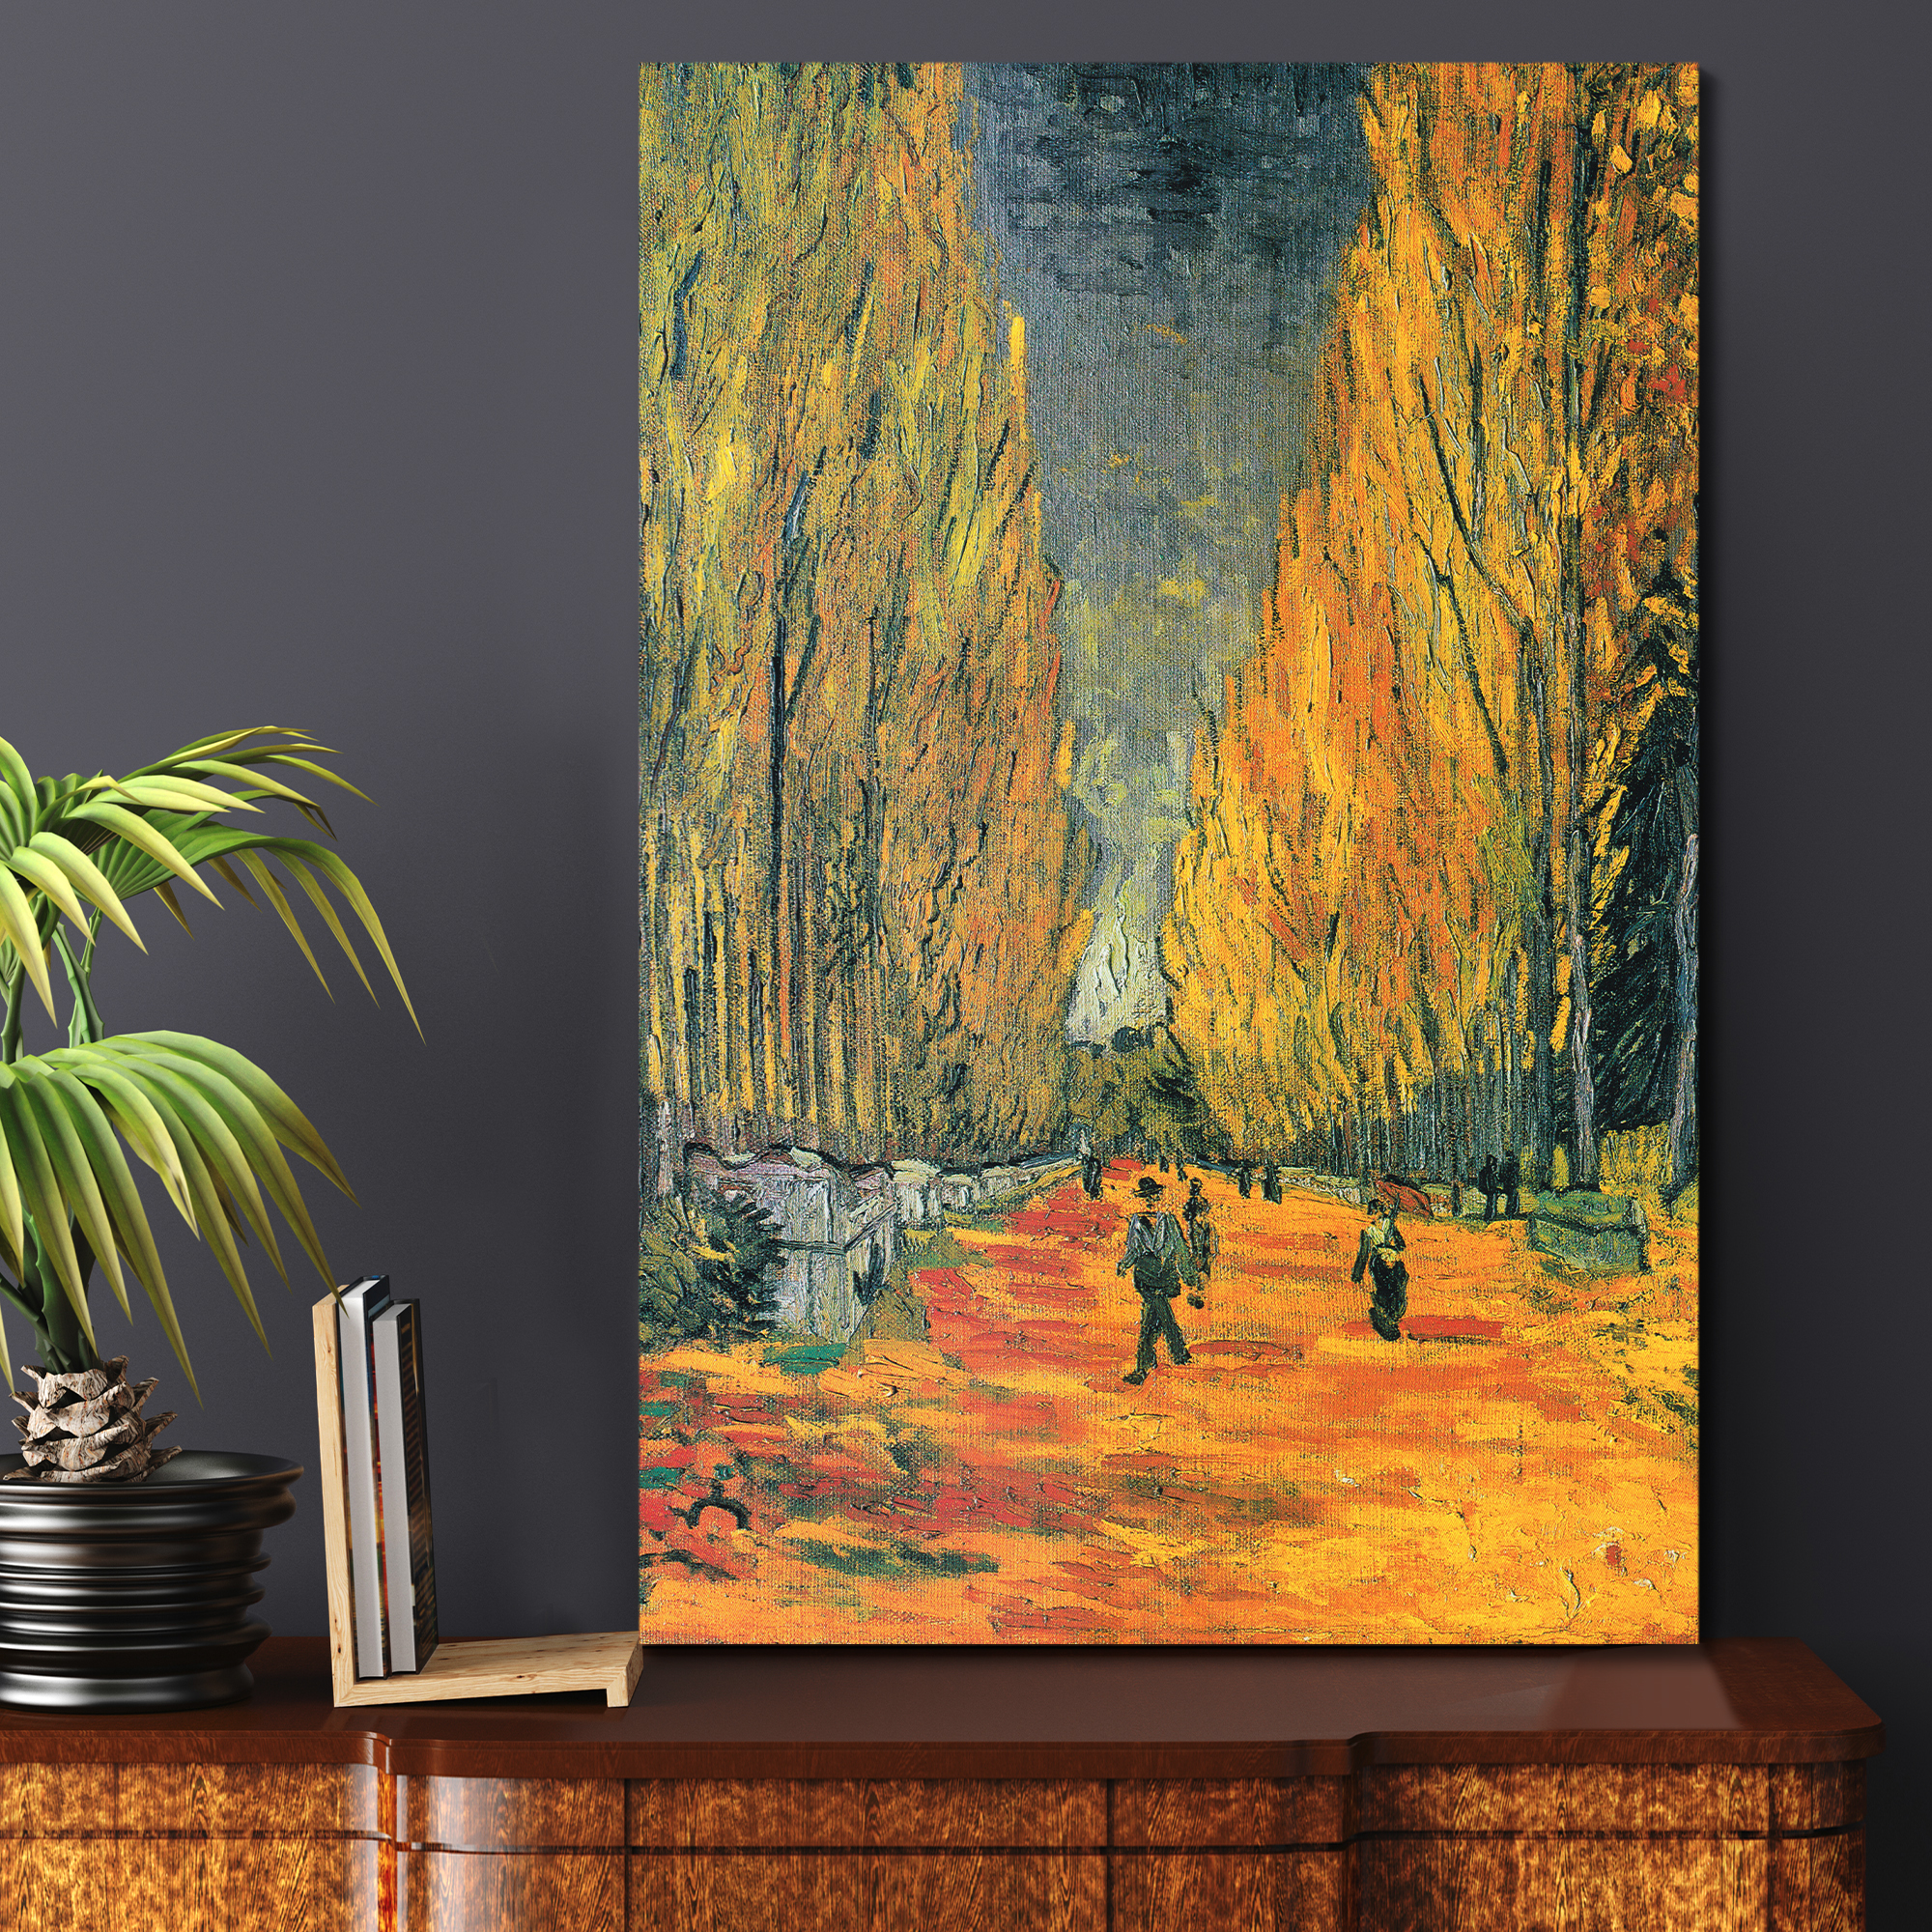 Les Alyscamps by Vincent Van Gogh - Oil Painting Reproduction on Canvas Prints Wall Art, Ready to Hang - 12x18 inches